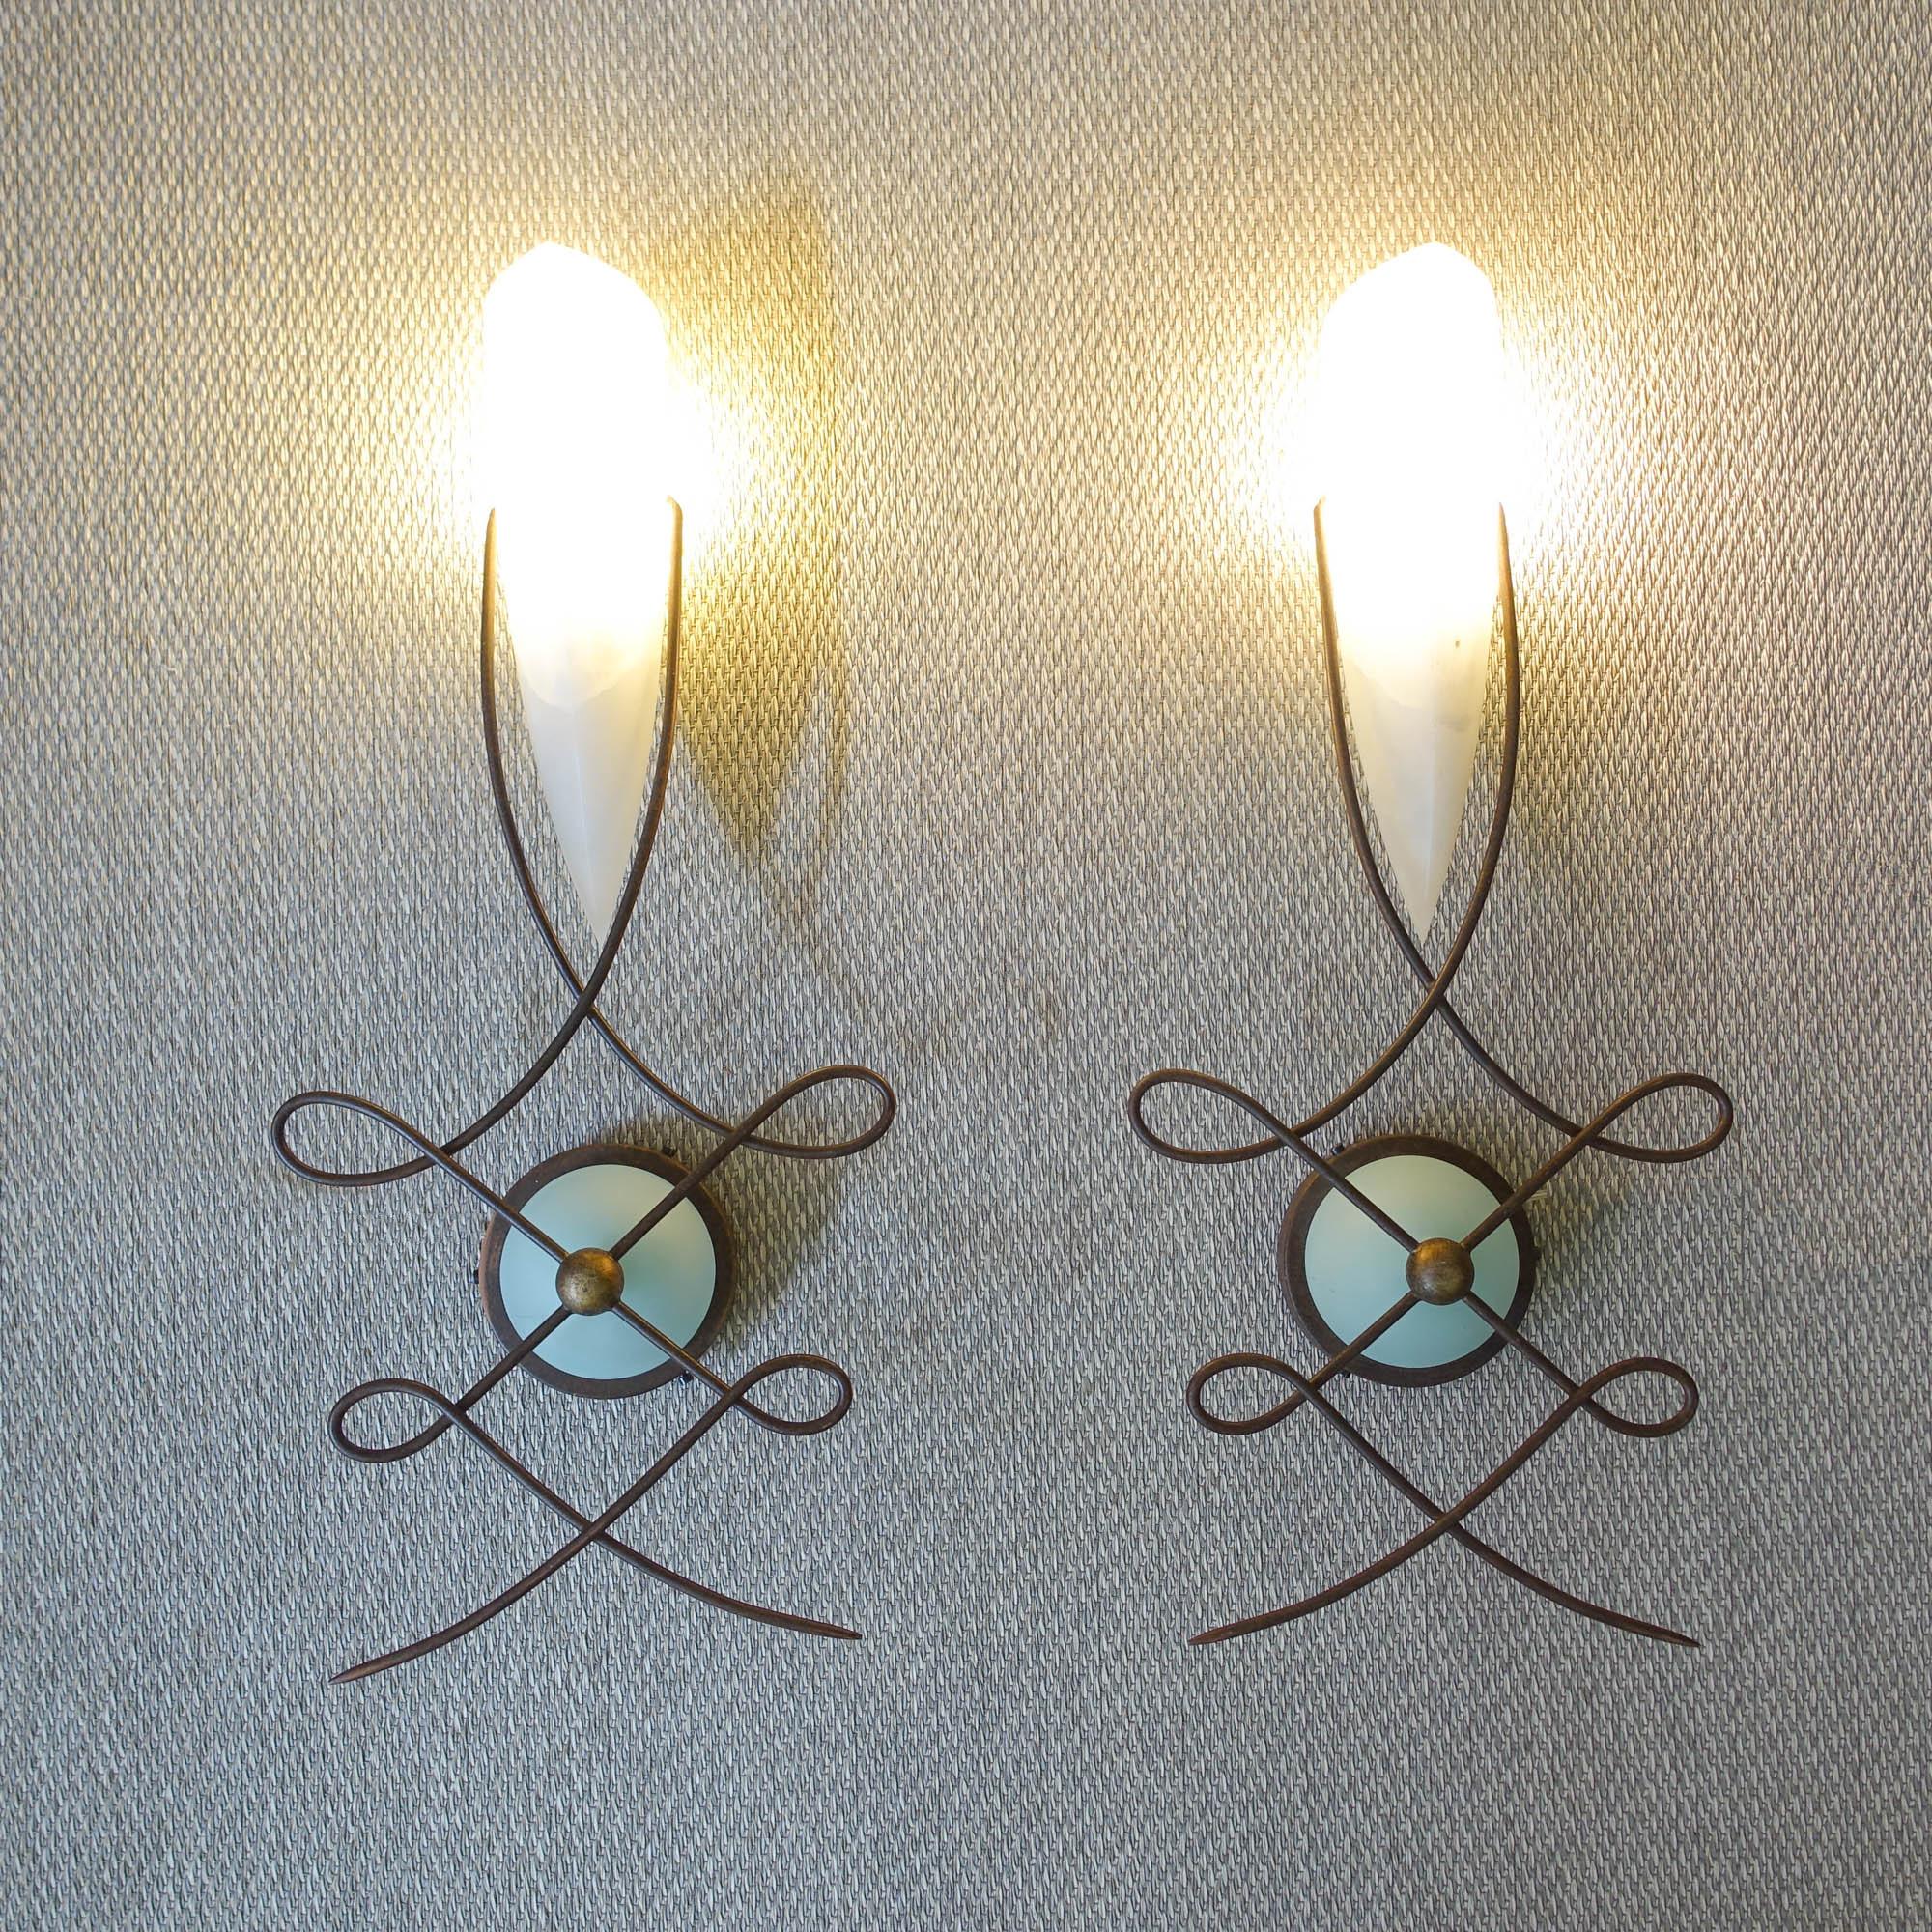 This pair of wall lamps, model Louvre, was designed by Jean-François Crochet for Terzani, in Italy, during the 1980's. These lamps are made of handcrafted metal with a rust finish and a finely crafted cream-colored alabaster shade. The thick